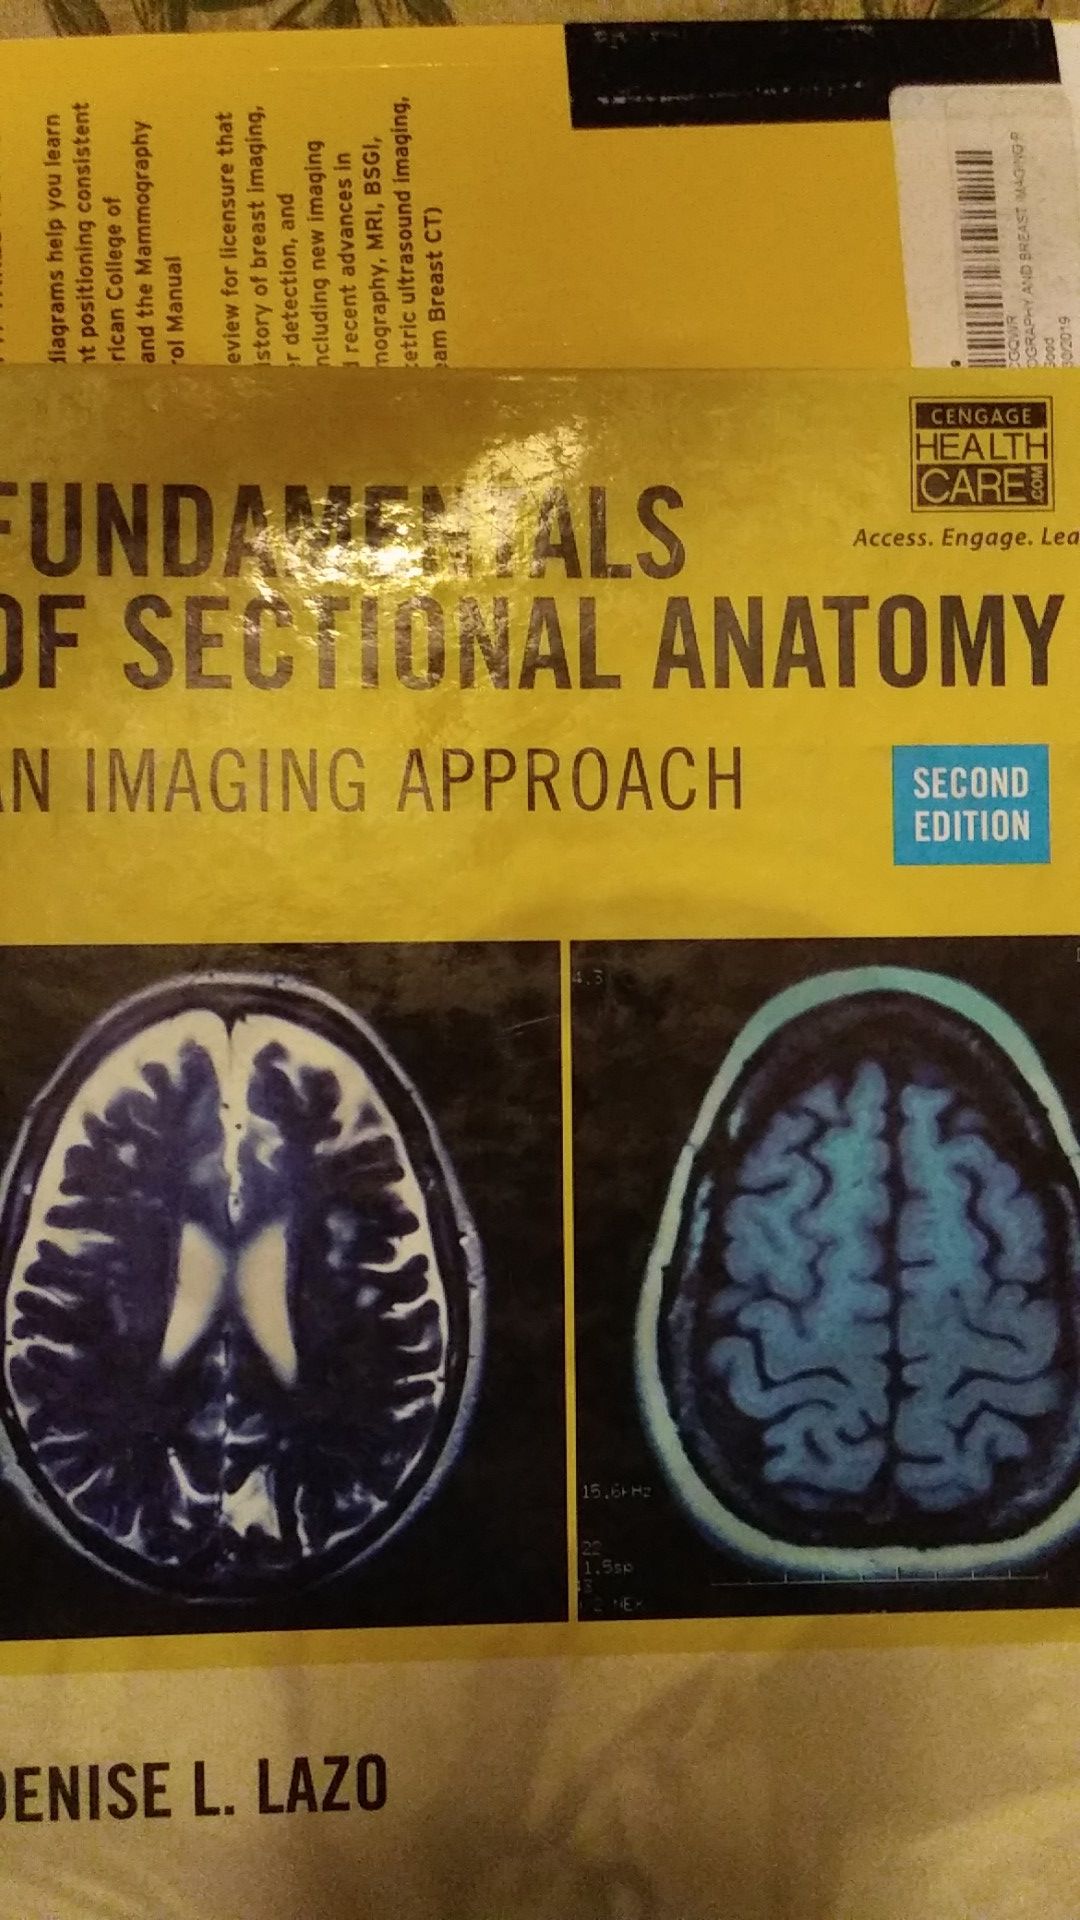 Fundamentals of Sectional Anatomy, 2nd ed.